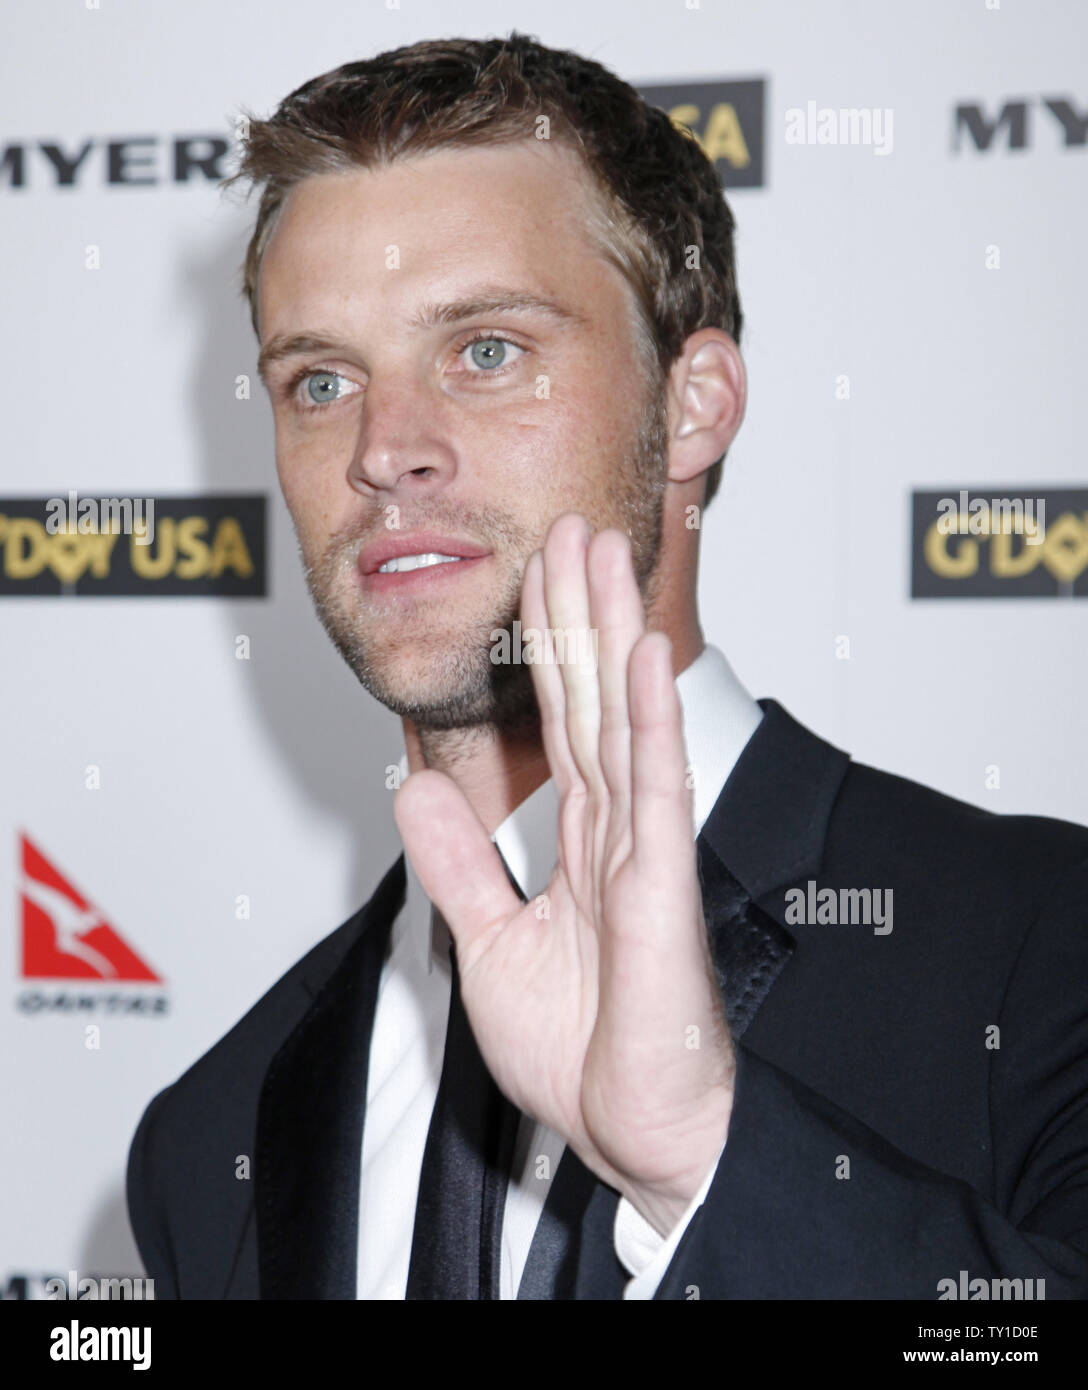 Jesse Spencer arrives on the red carpet at the G'Day USA 2010 Los Angeles Black Tie Gala in Hollywood on January 16, 2010.  The event honors high profile individuals for significant contributions to their industries and for excellence in promoting Australia in the United States.   (UPI/David Silpa) Stock Photo